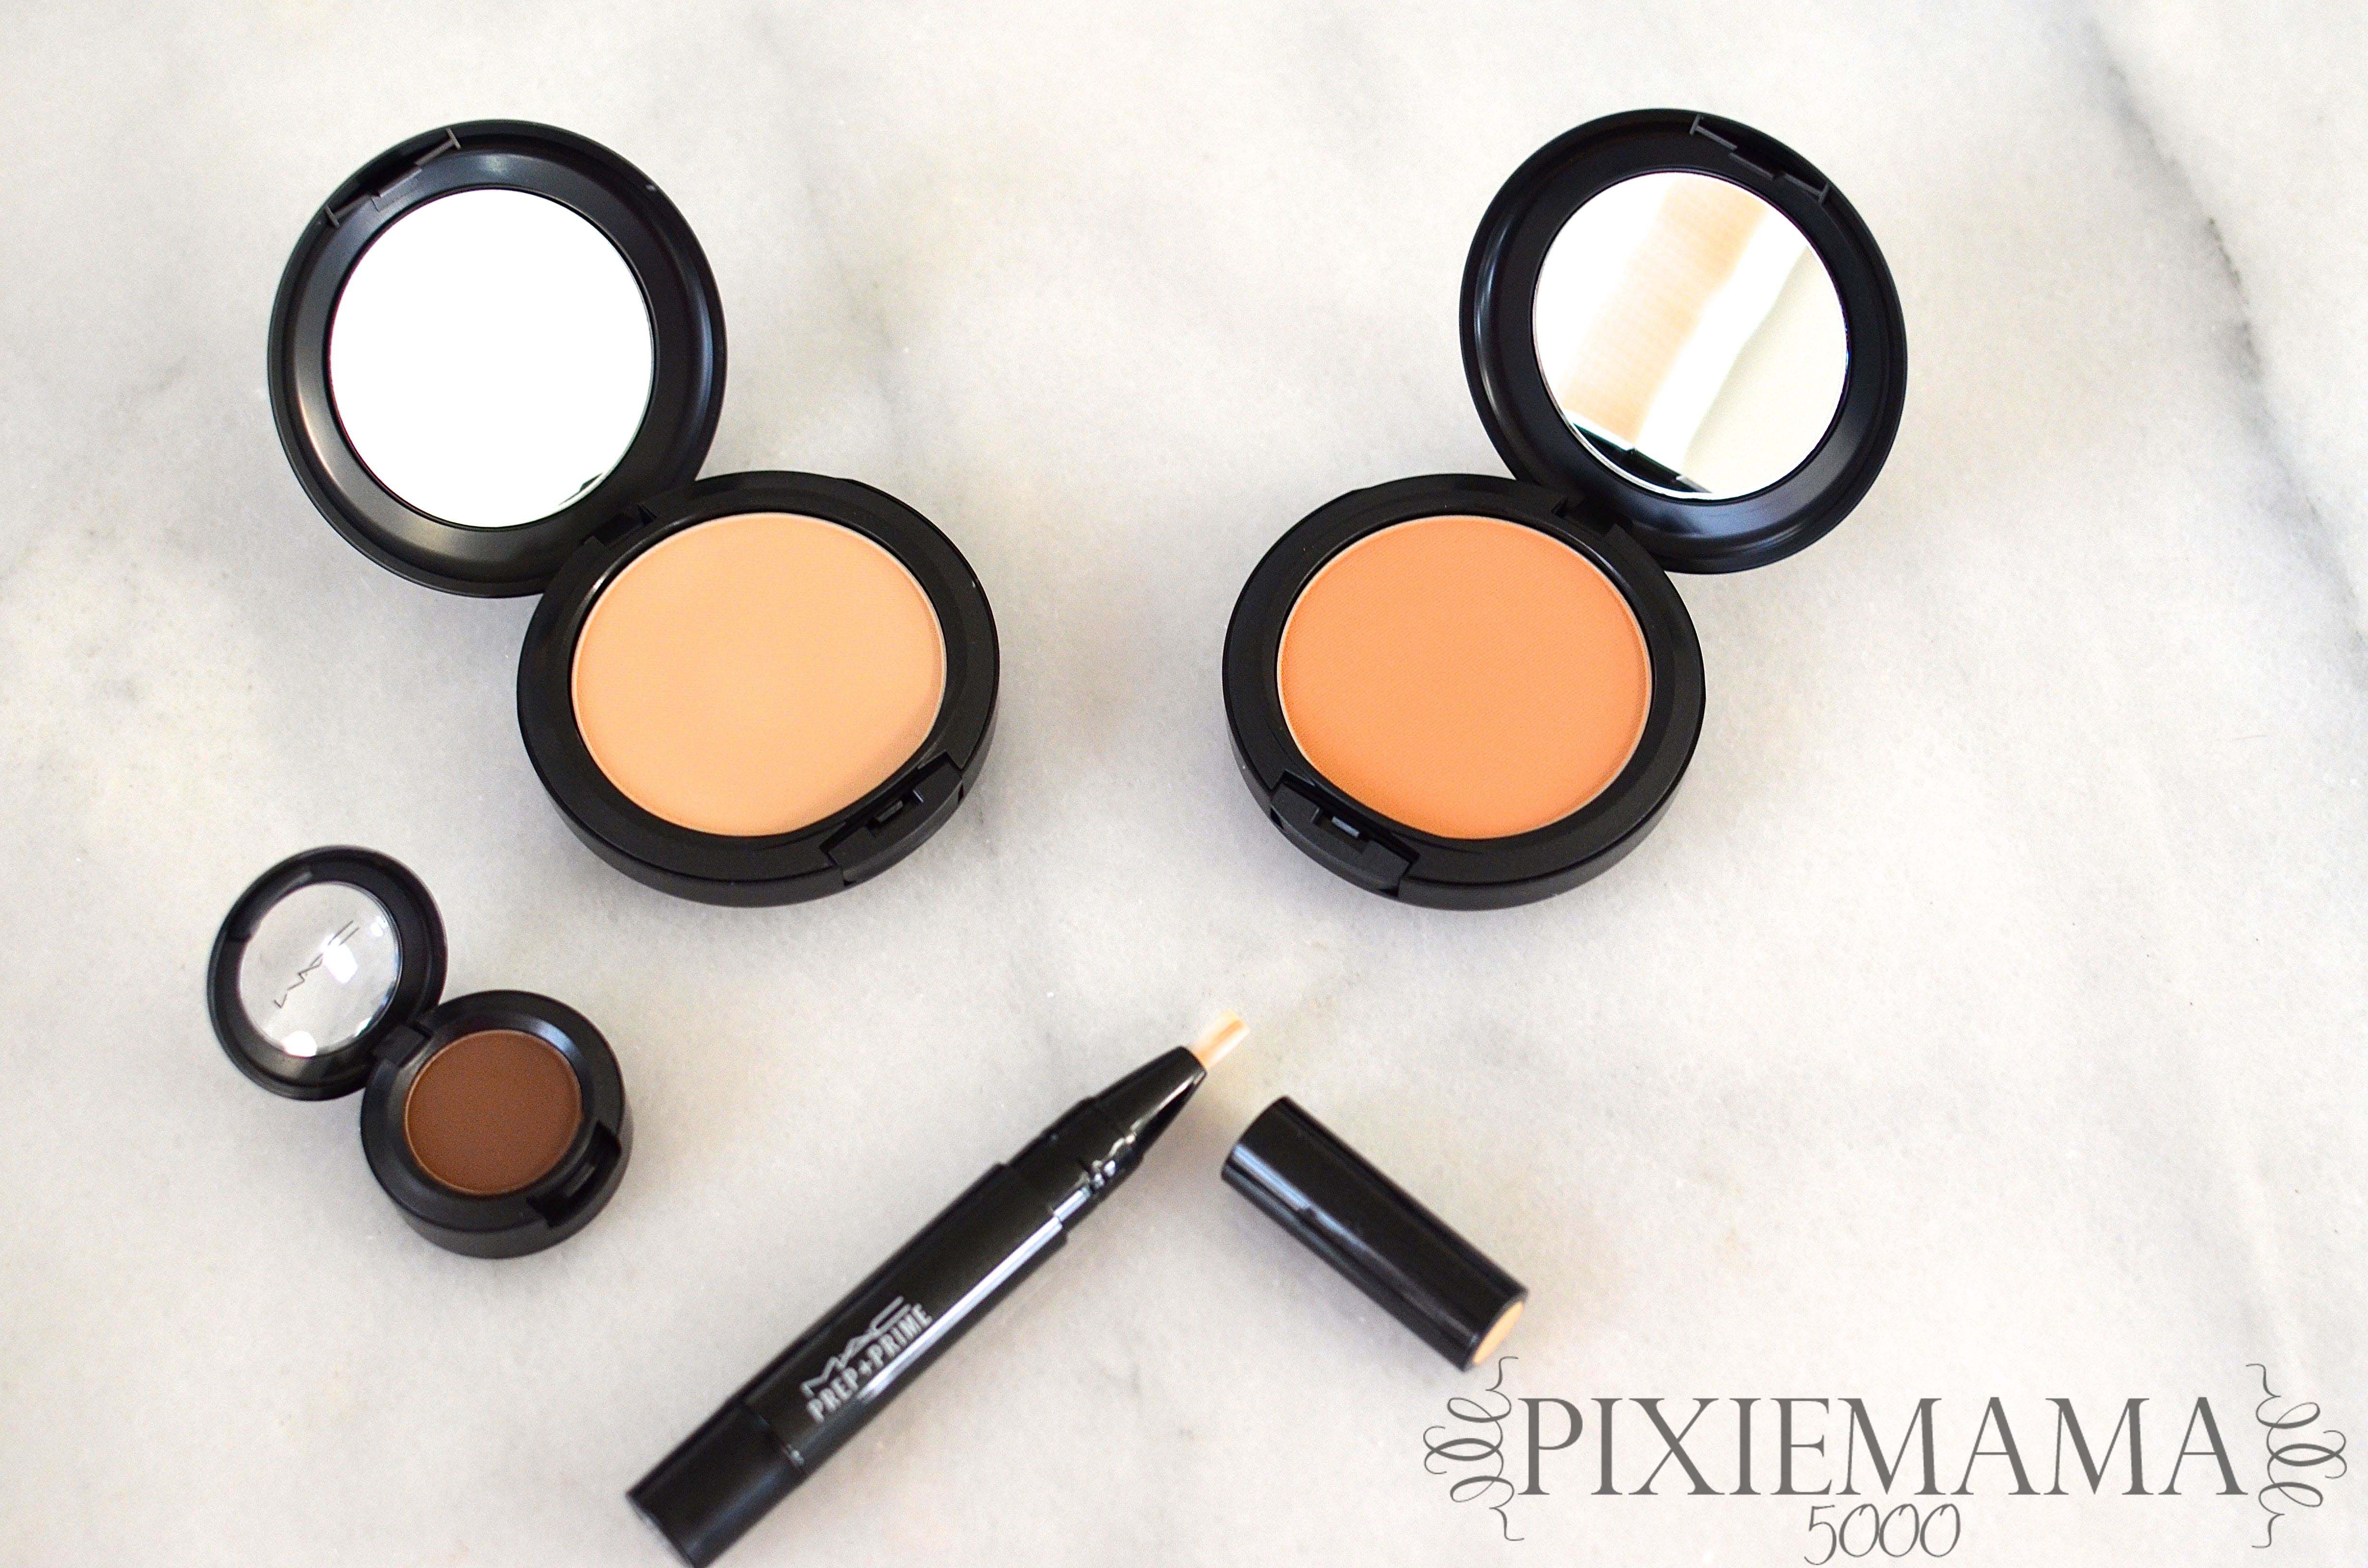 Highlighting and Contouring for an Everyday Look! – Pixiemama